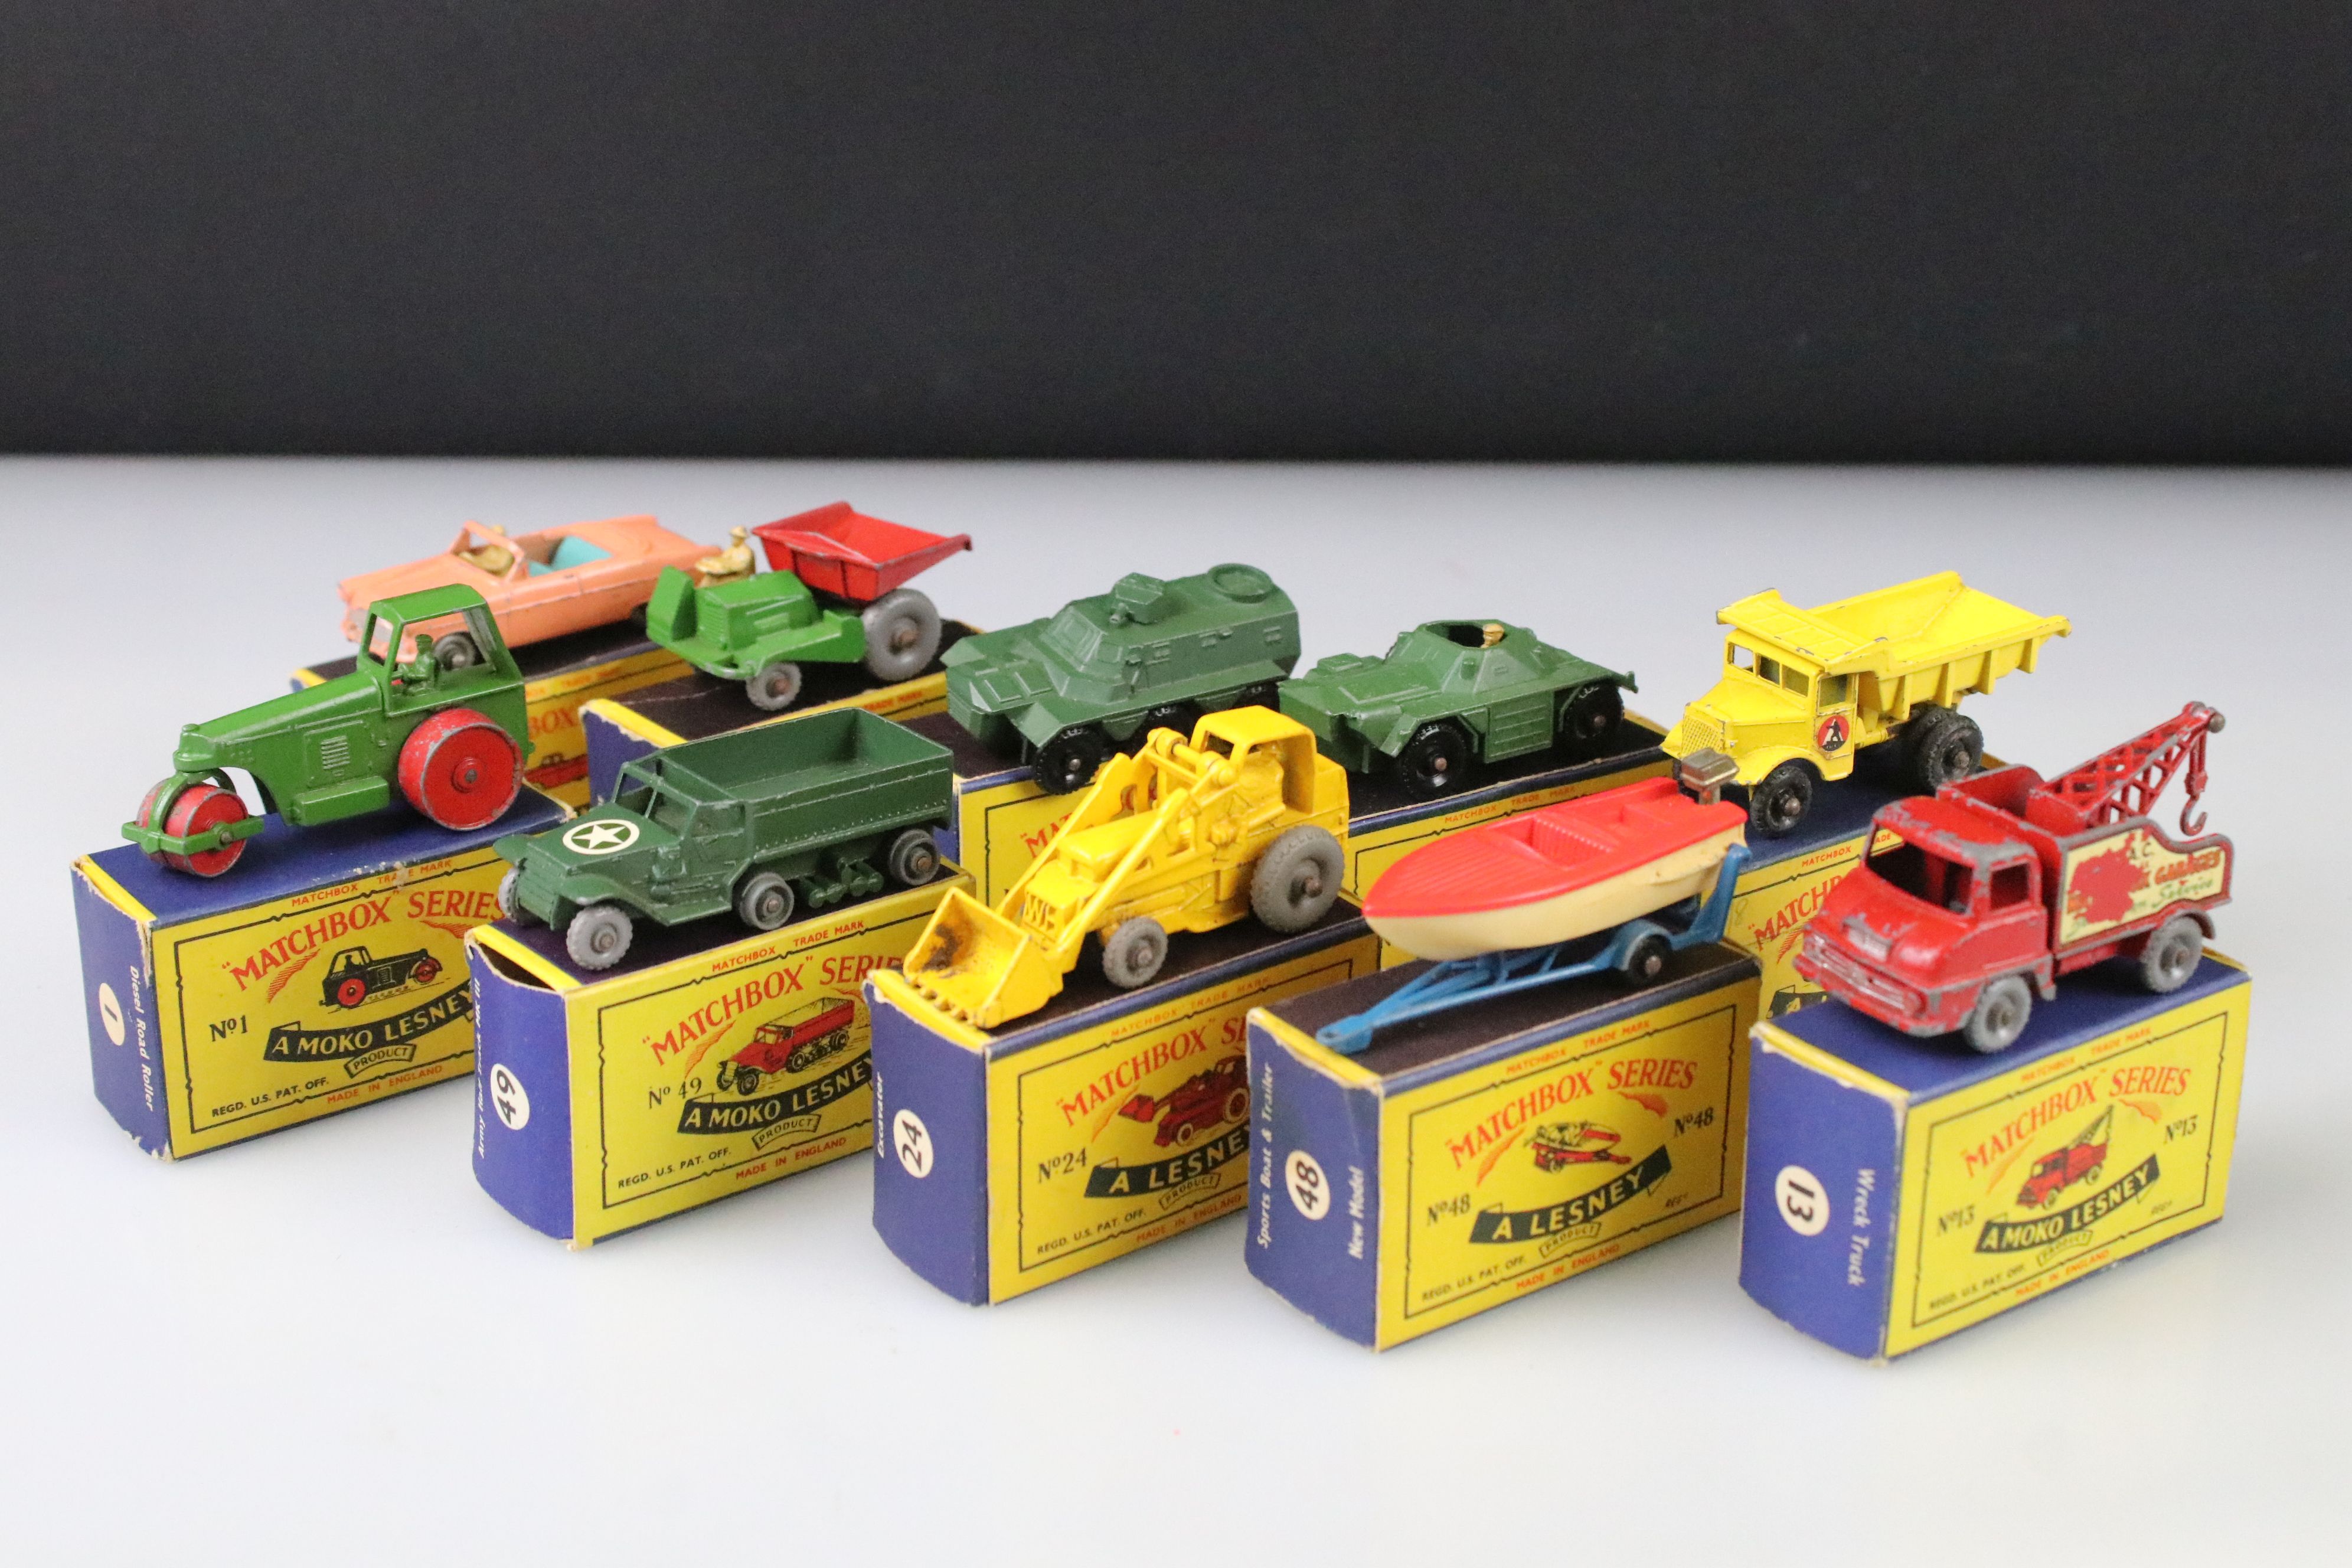 10 Boxed Matchbox Lesney 75 Series diecast models to include 1 Diesel Road Roller, 49 Army Half